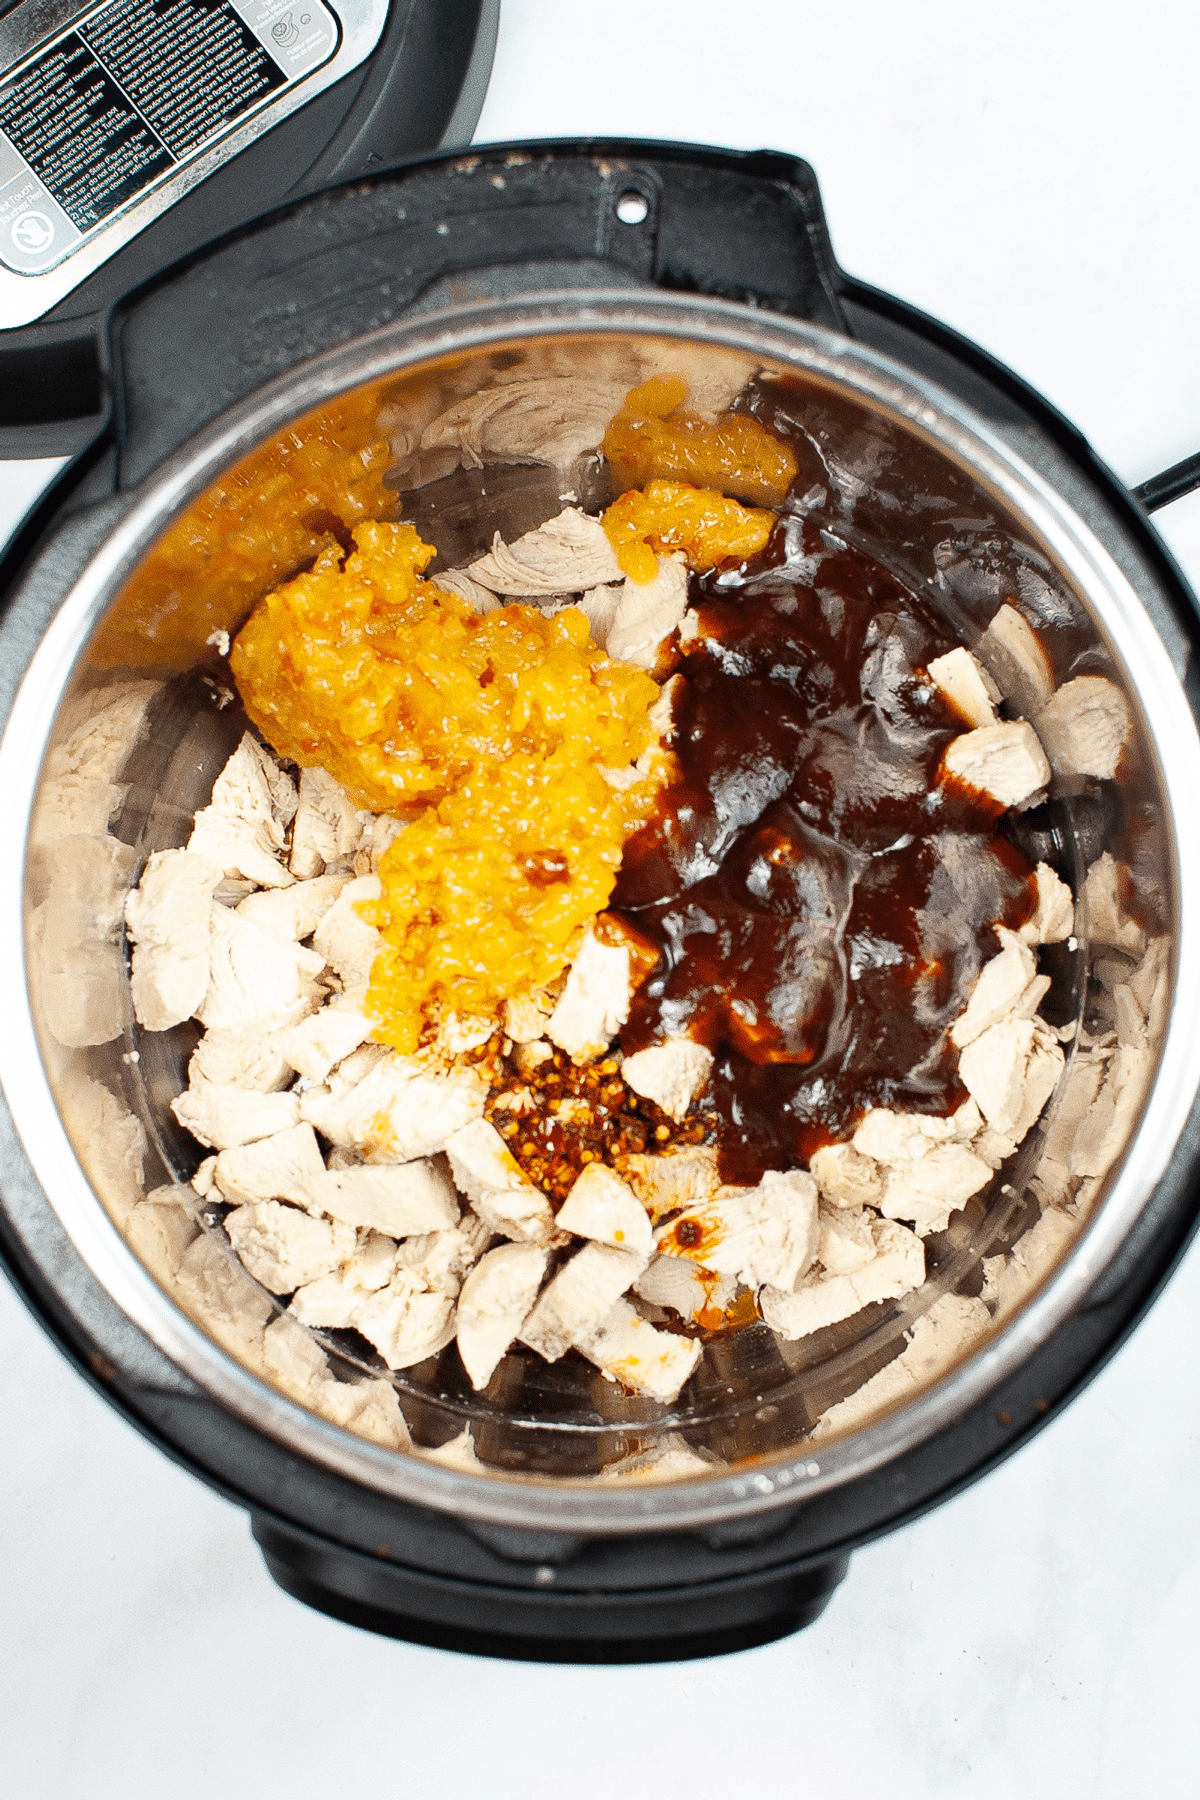 IP orange chicken process of mixing the ingredients in a pot